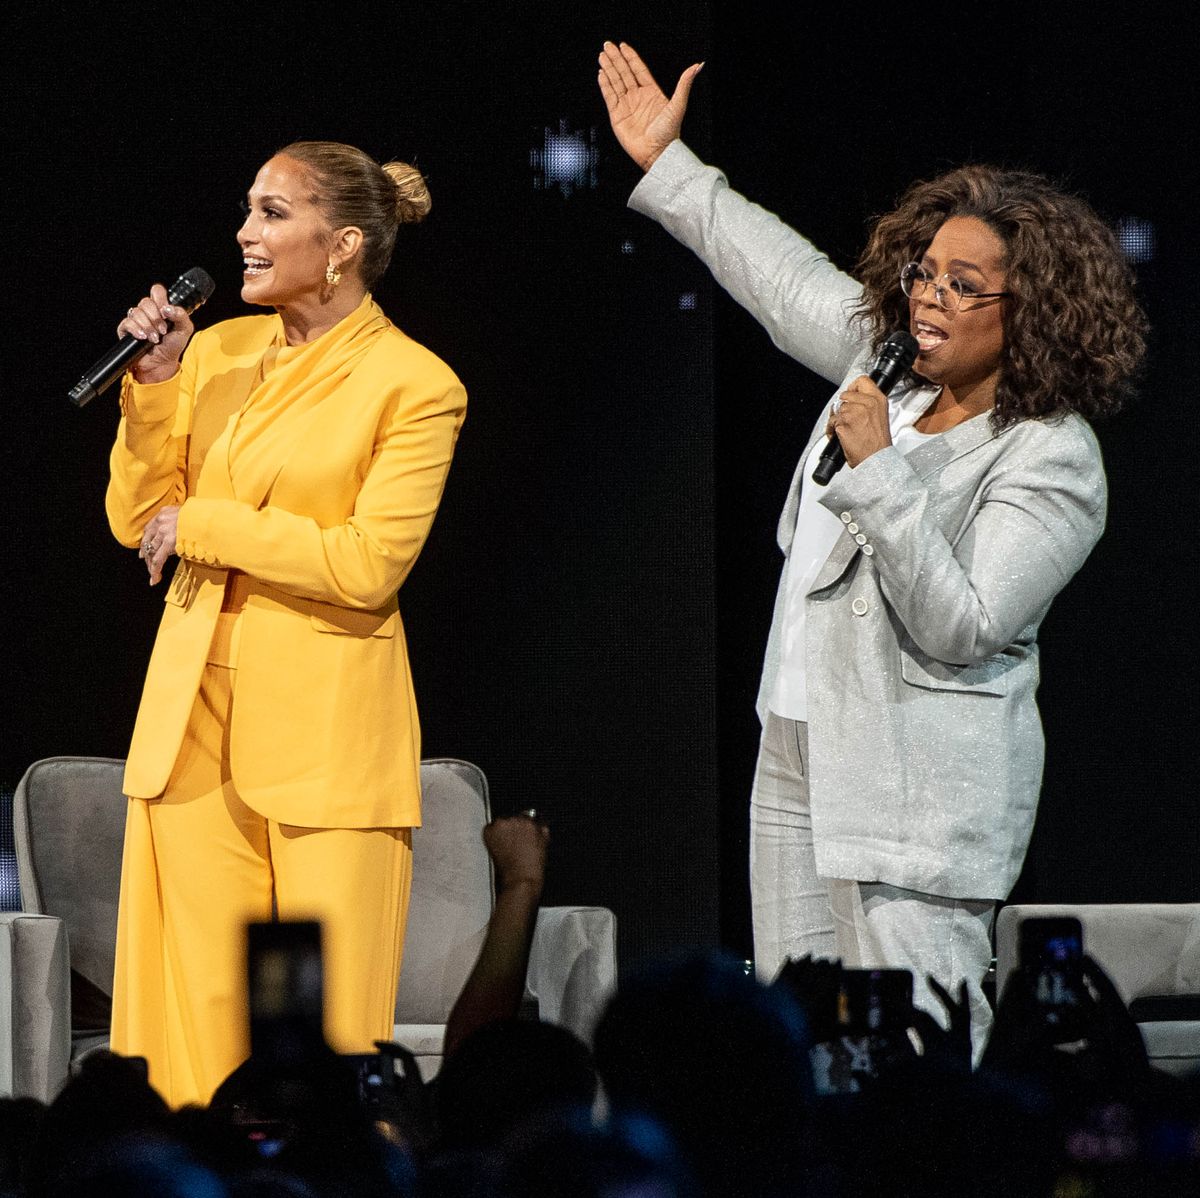 Oprah's 2020 Vision: Your Life In Focus Tour With Special Guest Jennifer Lopez